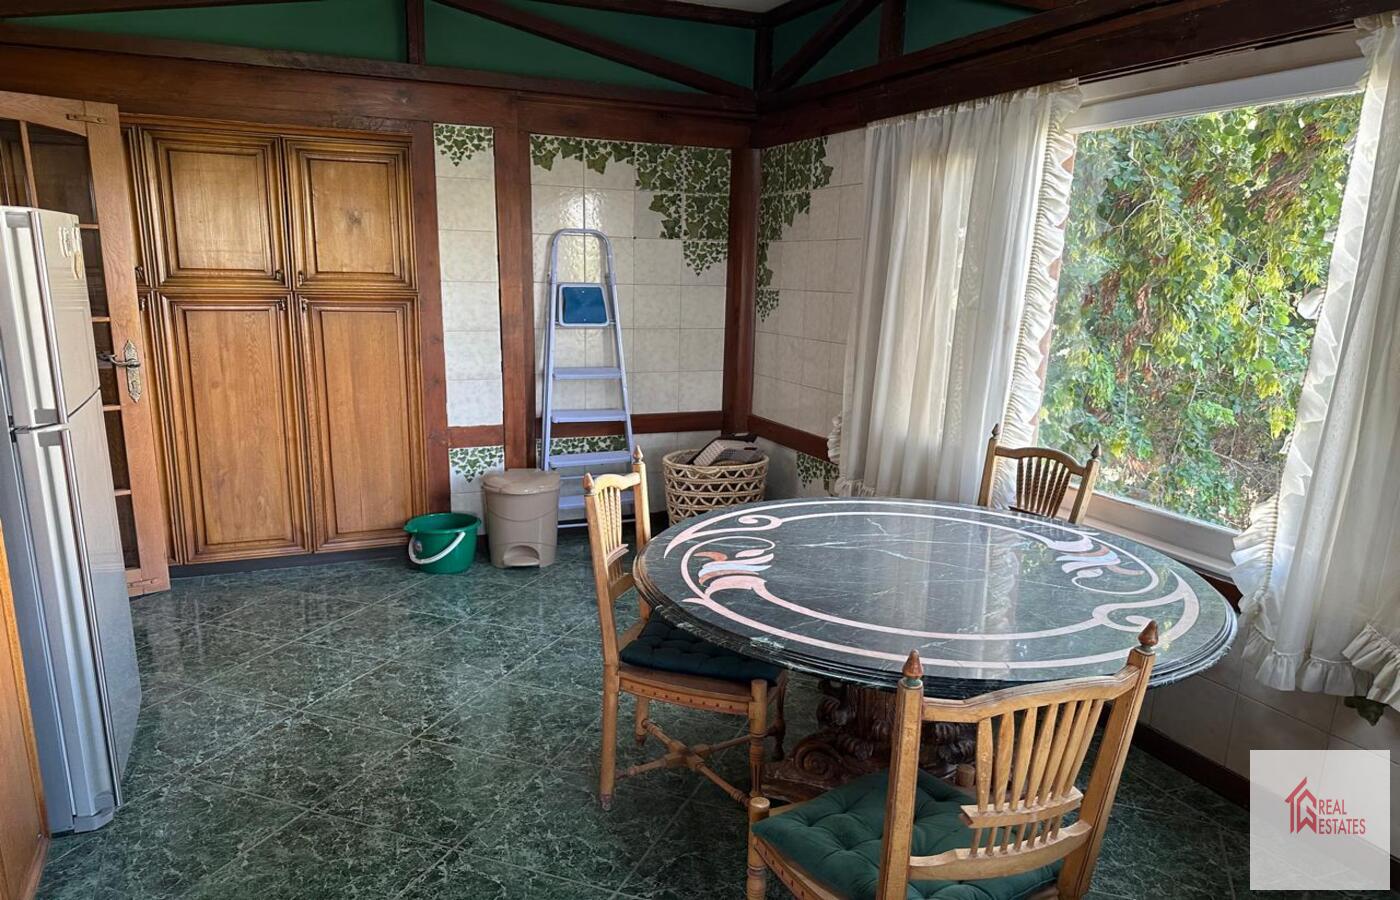 Lovely Fully Furnished Apartment For Rent In a Prime Location In Maadi Sarayat.